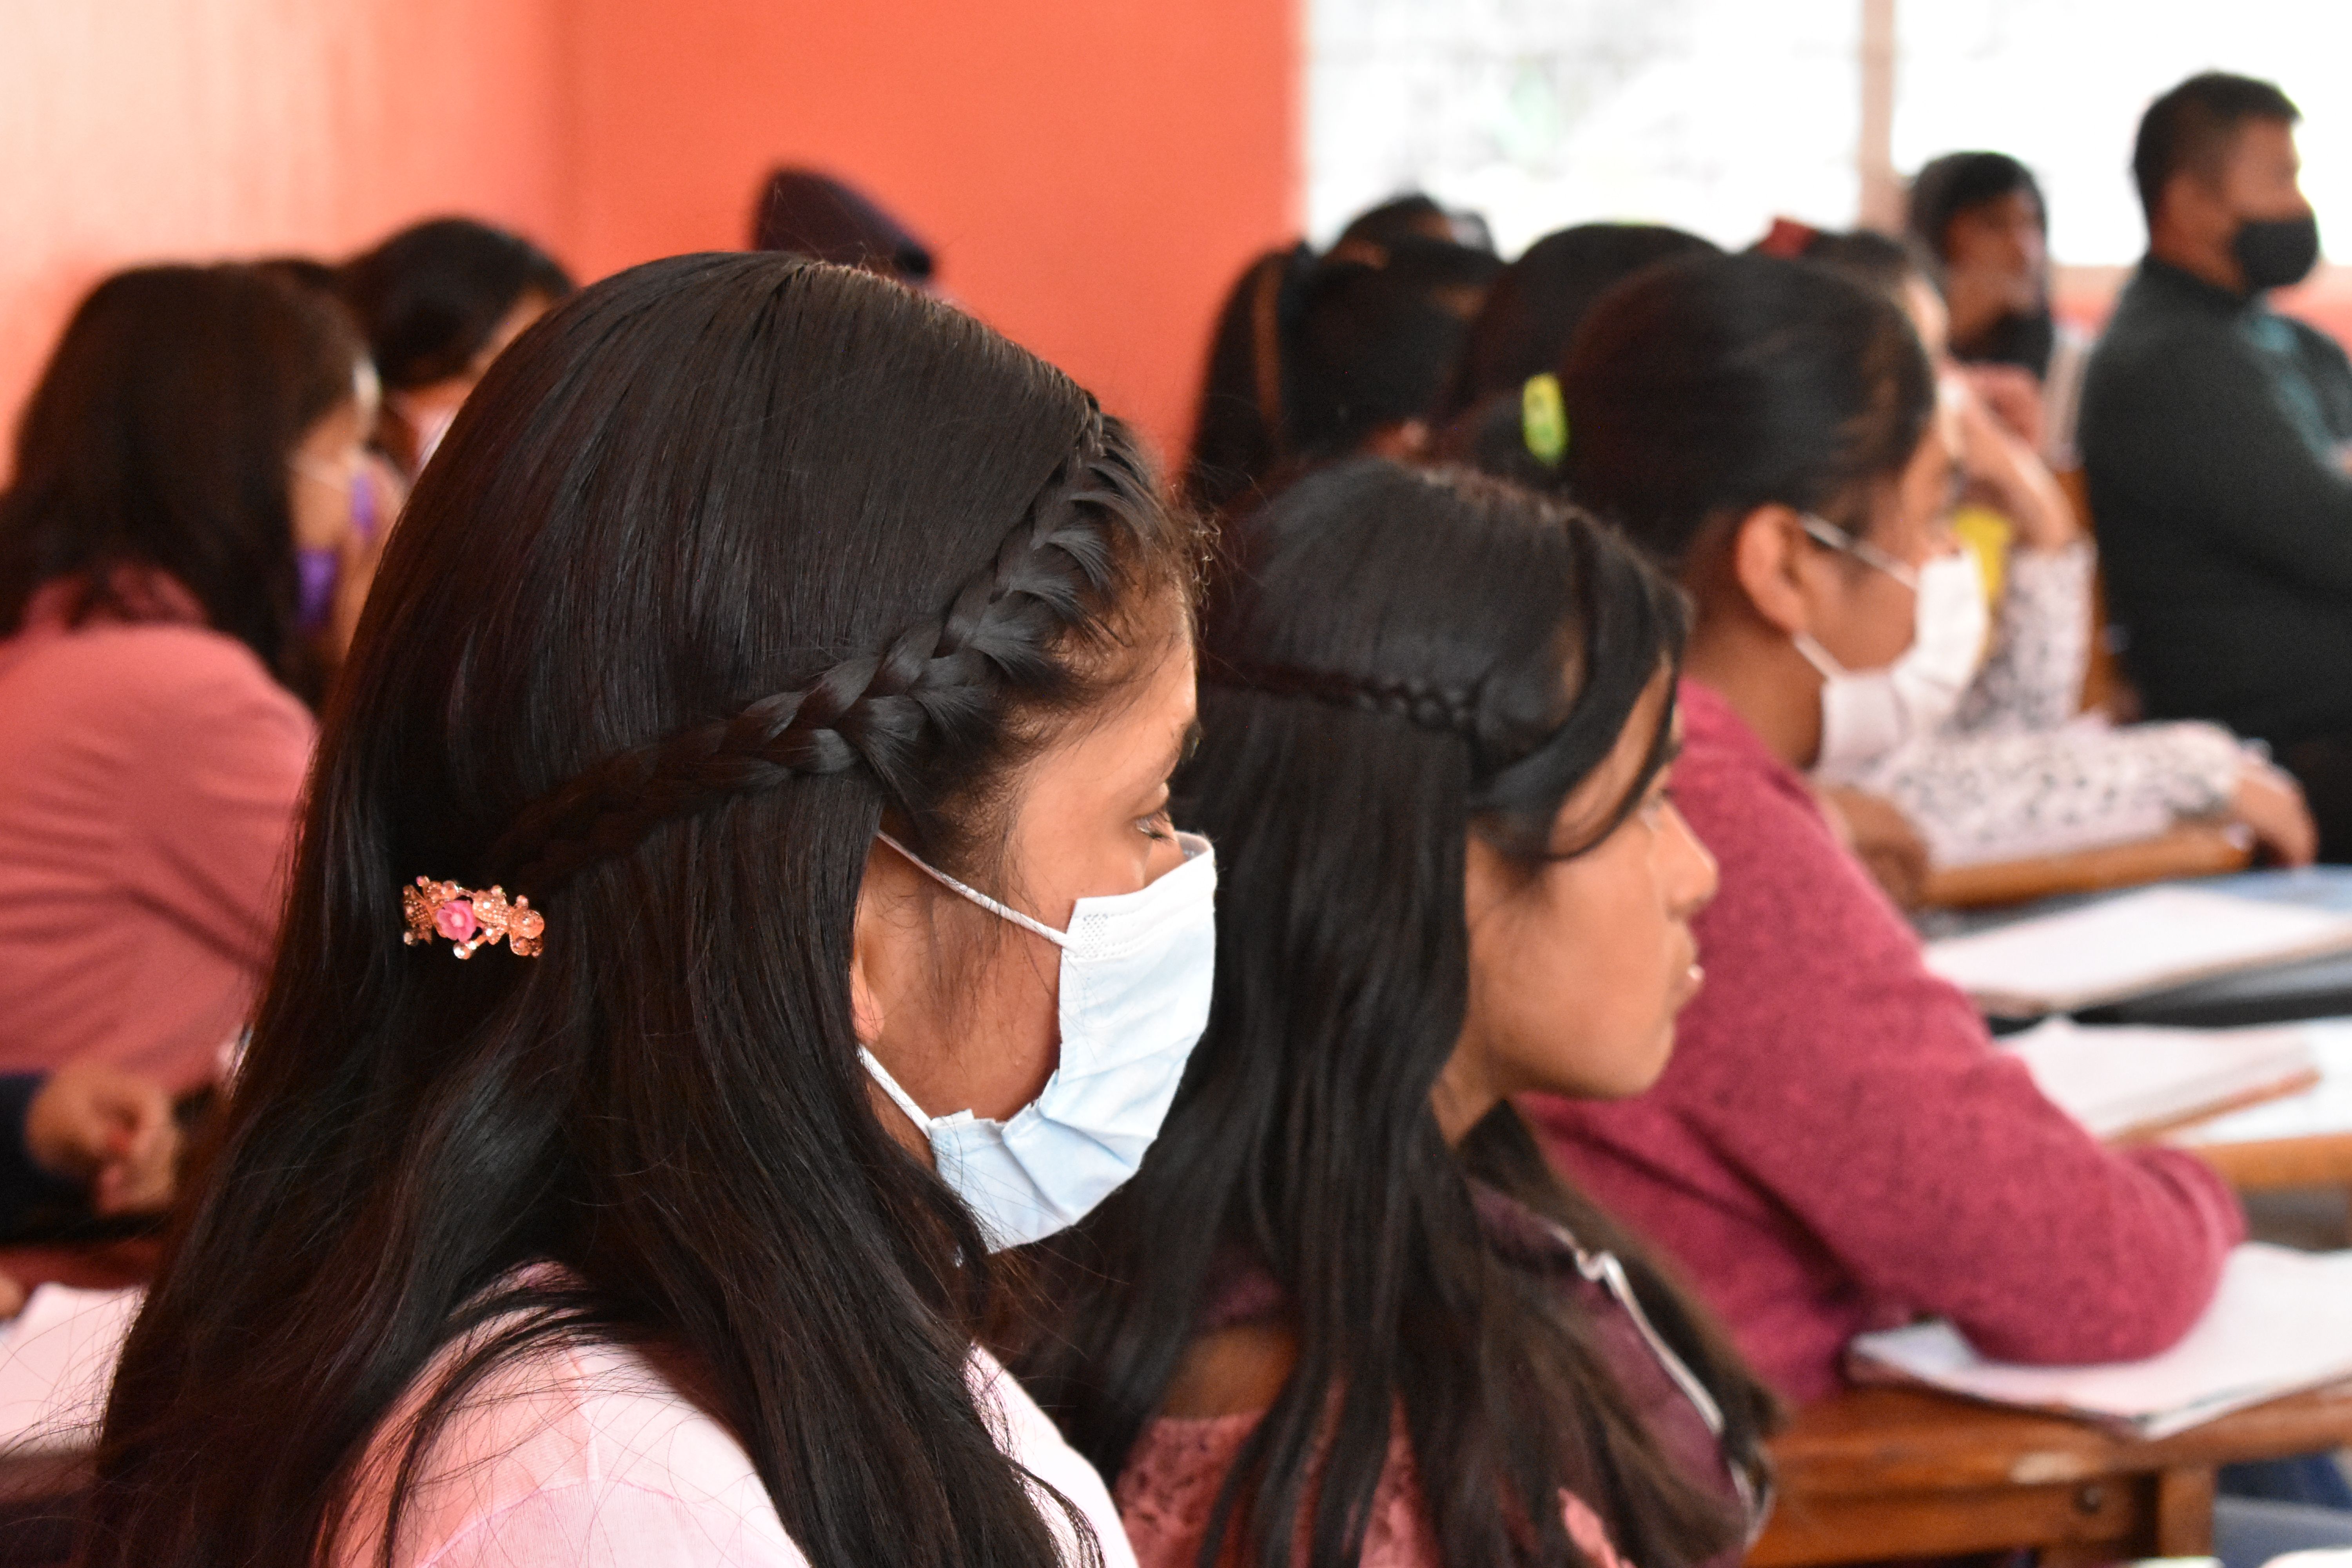 A student sits, wearing a mask, in a row of her classmates